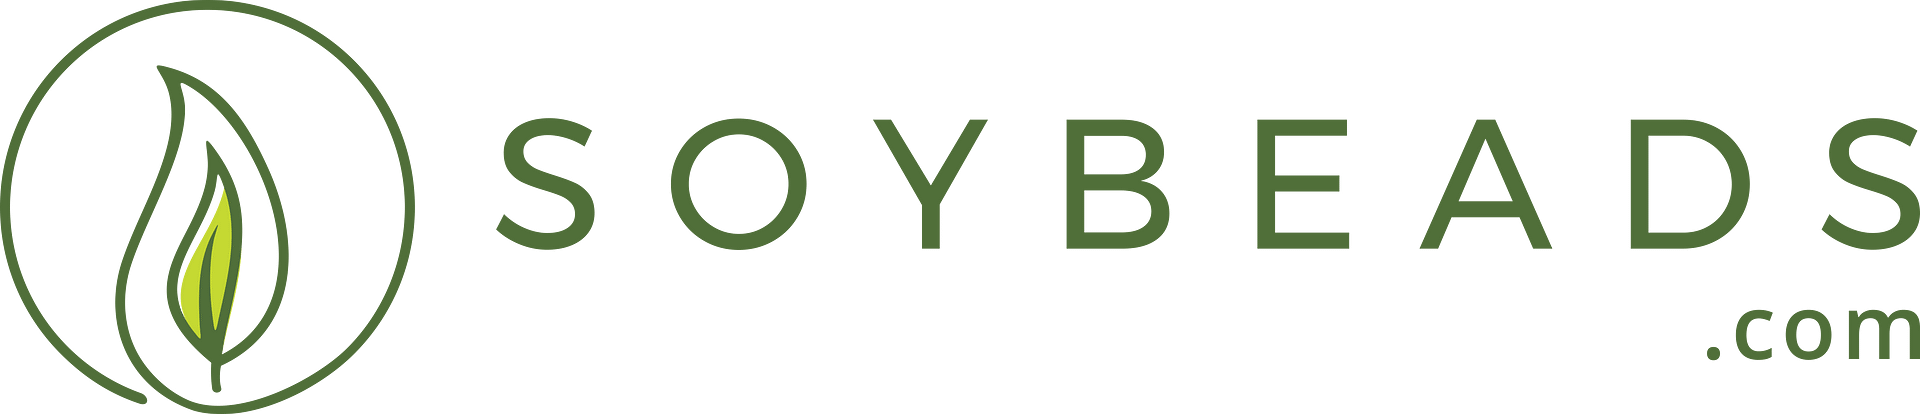 Soybeads